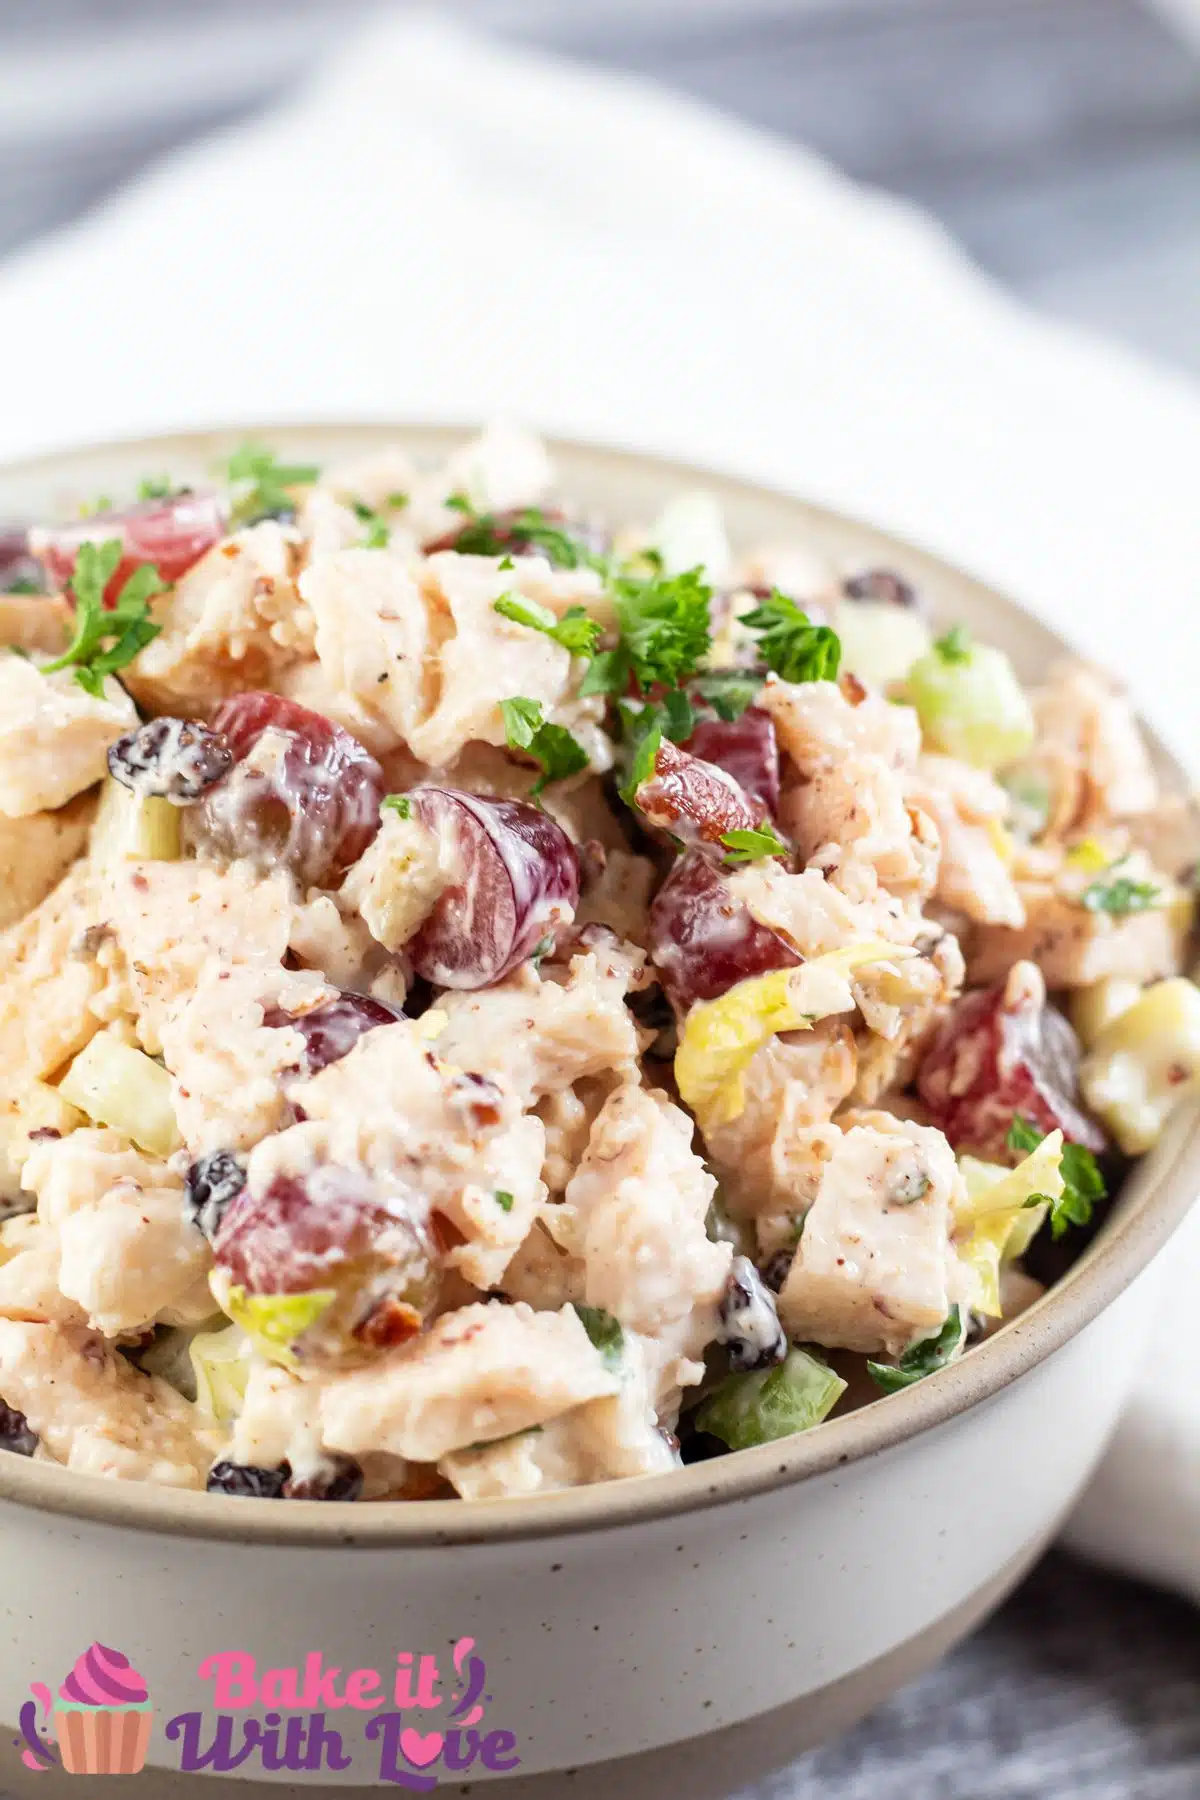 Tall image of a bowl of chicken salad with grapes.